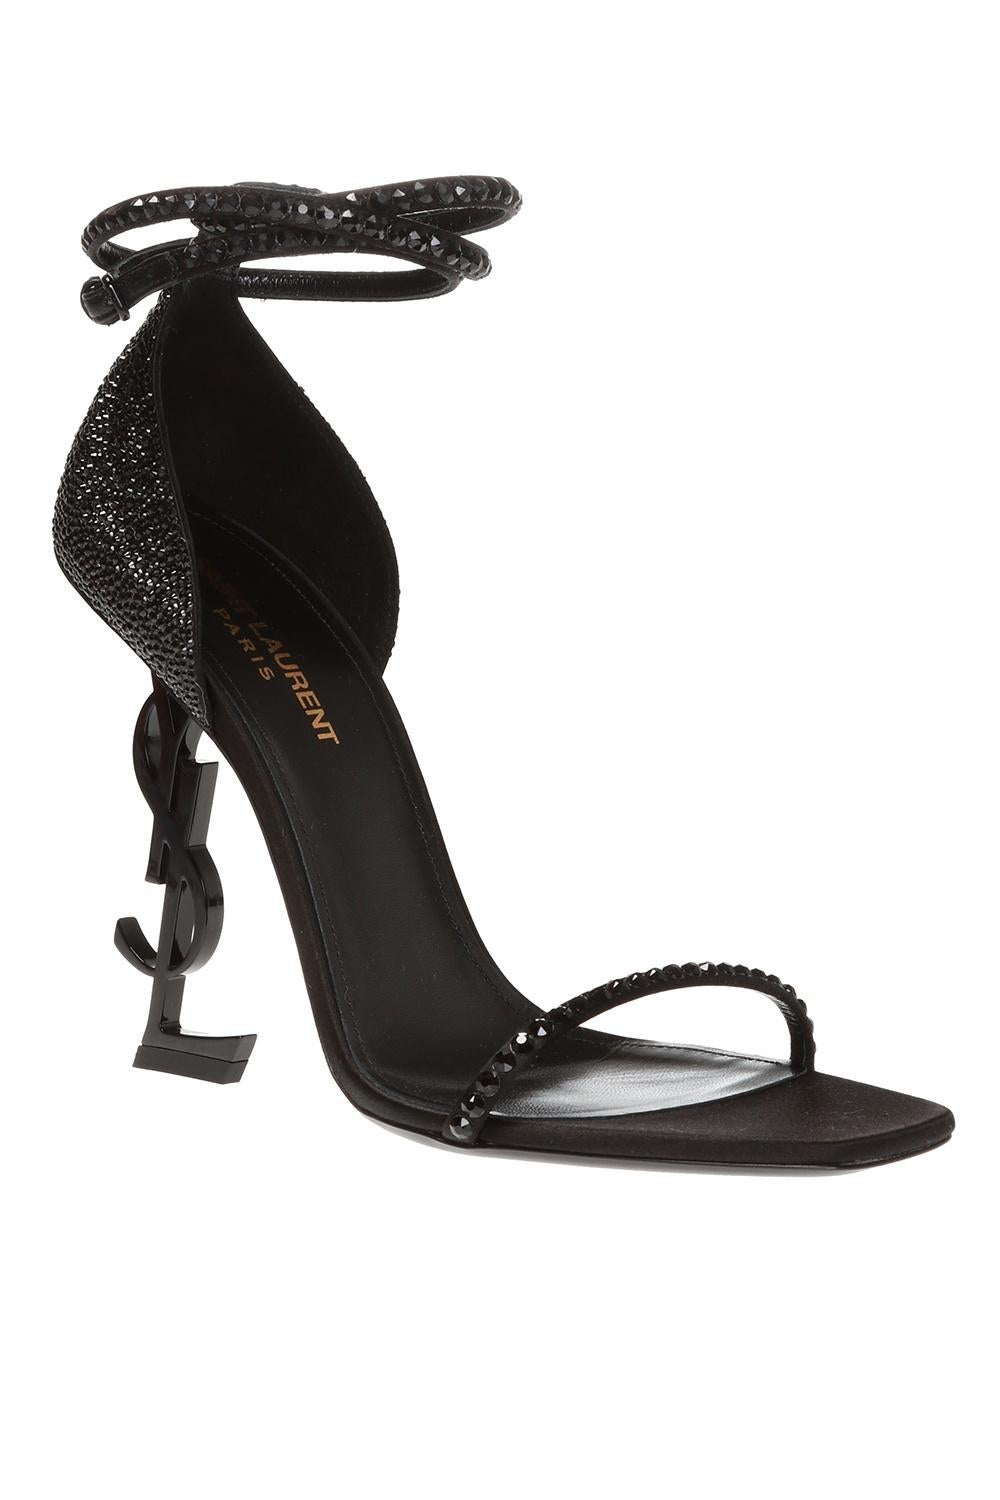 Saint Laurent Black Crystal Embellished Opyum 110 Heeled Sandal

Black Opyum 110 Sandal from Saint Laurent featuring a wrap around adjustable ankle strap, black crystal embellishments, a YSL monogram heel, a square toe, and a strappy sandal